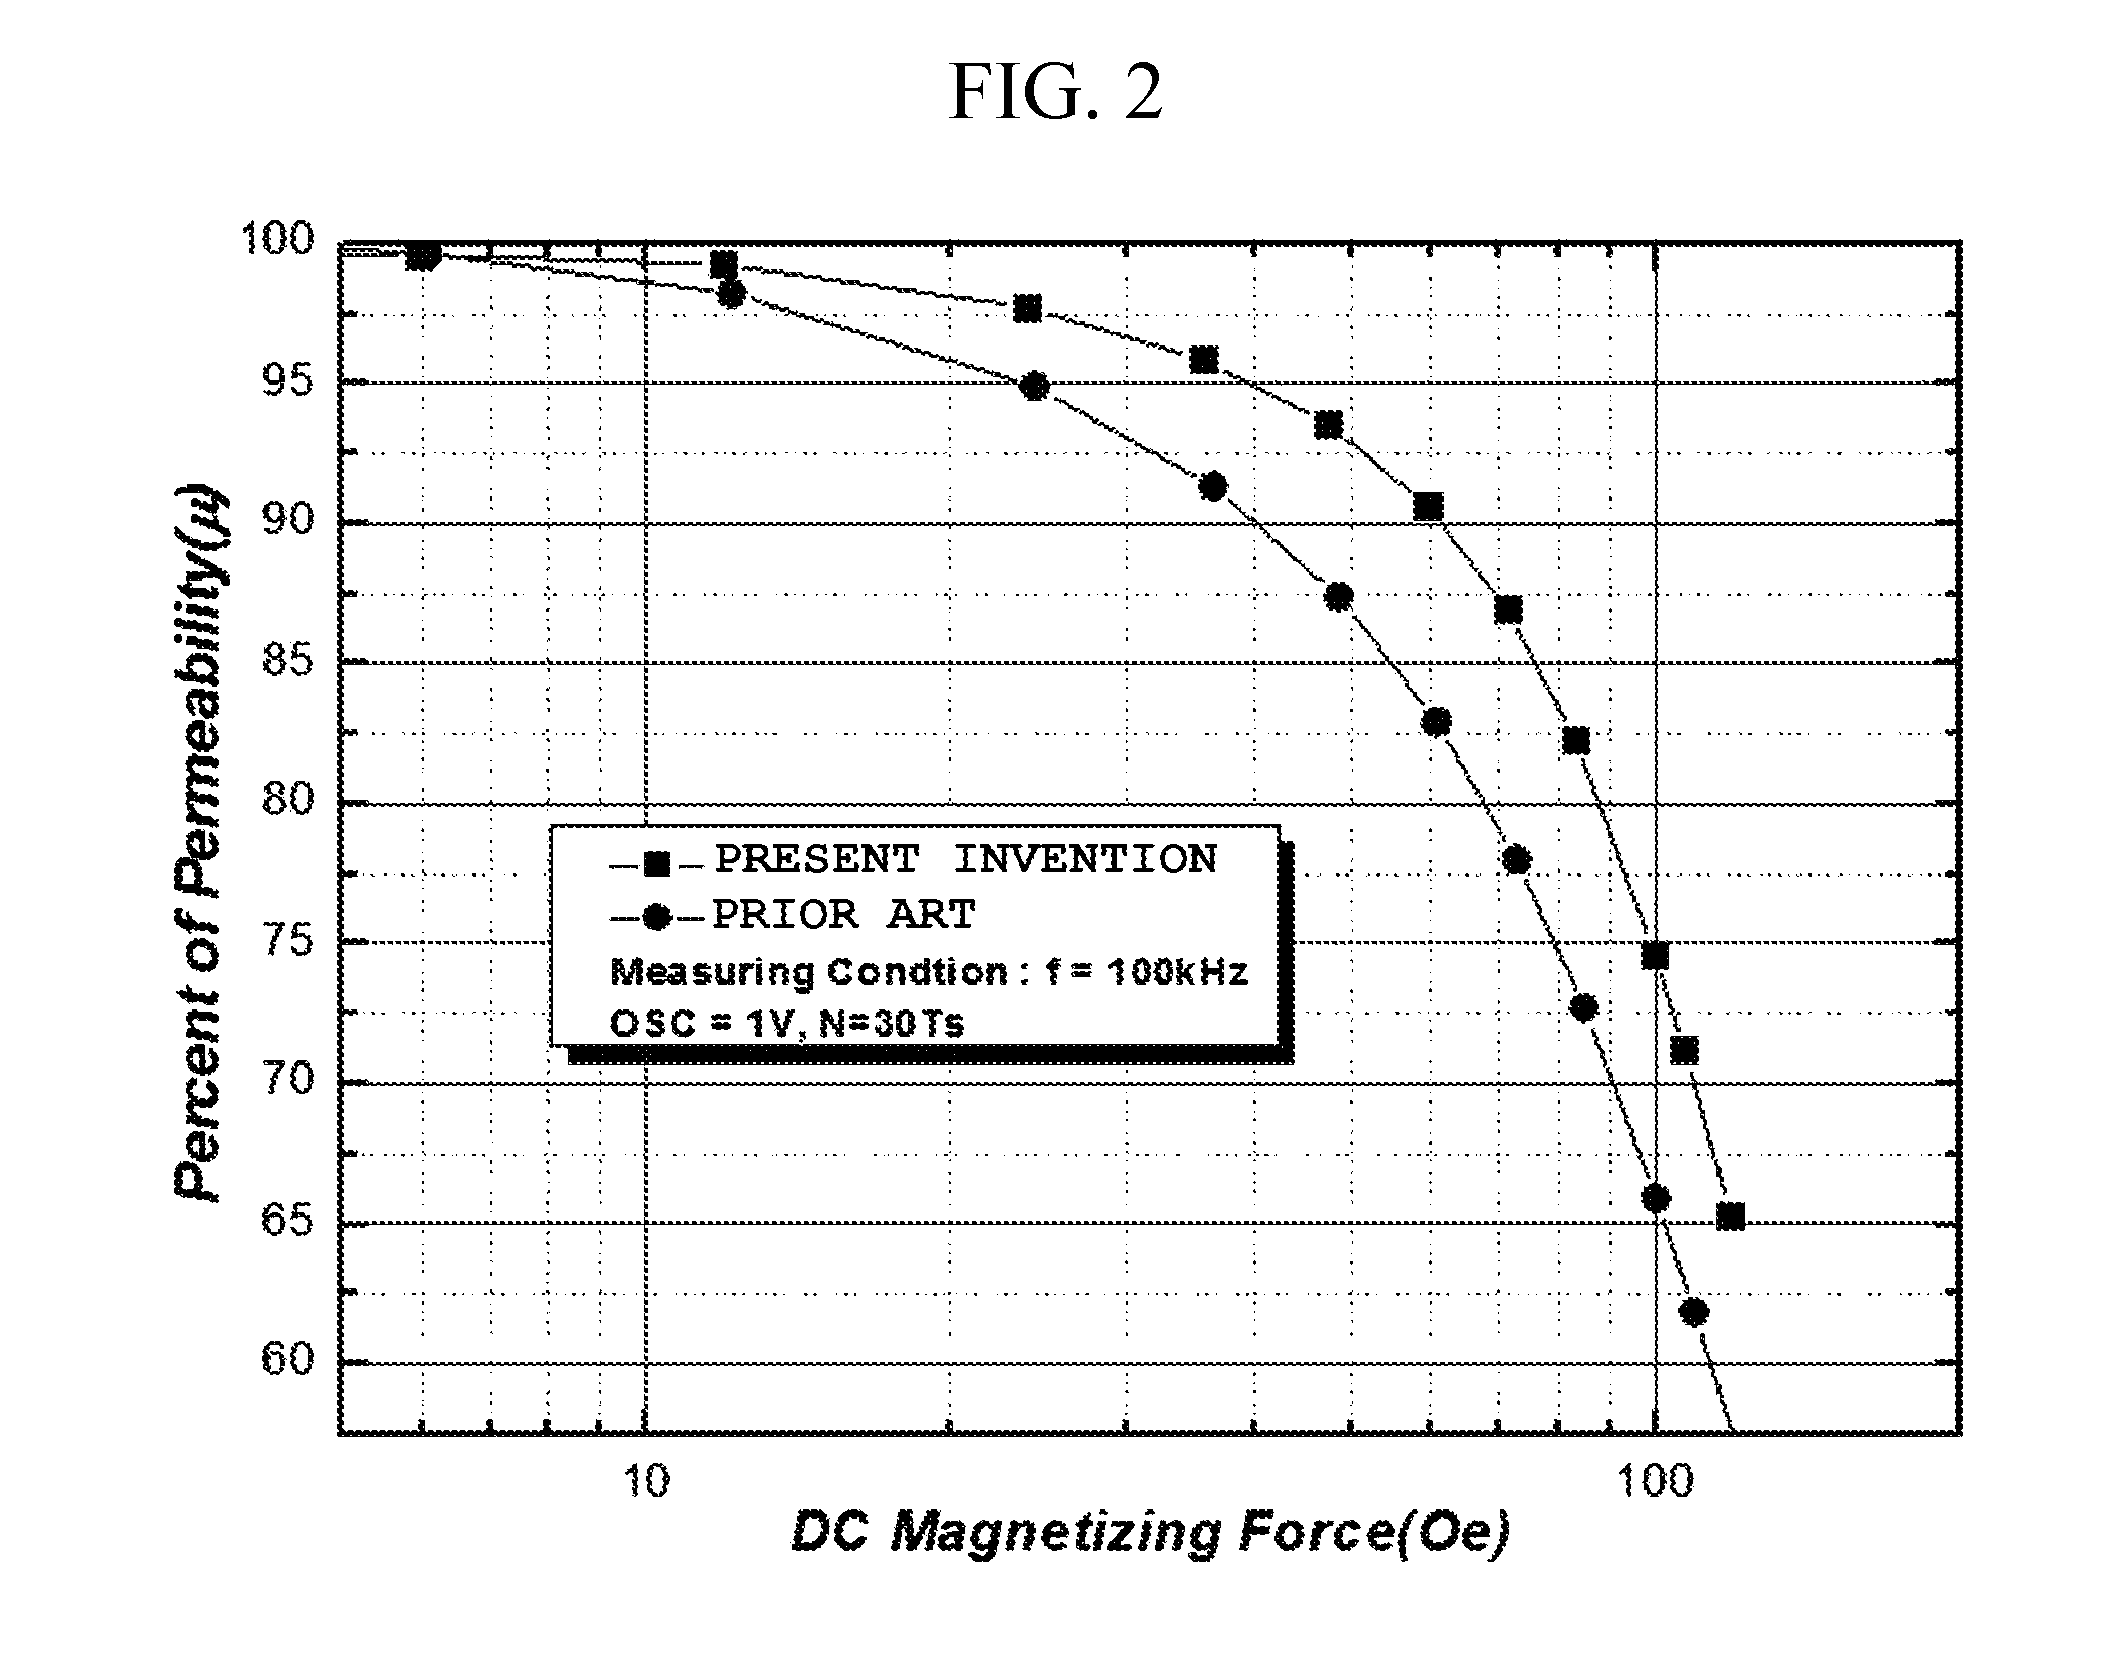 METHOD FOR MANUFACTURING Fe-BASED AMORPHOUS METAL POWDER AND METHOD FOR MANUFACTURING AMORPHOUS SOFT MAGNETIC CORES USING SAME